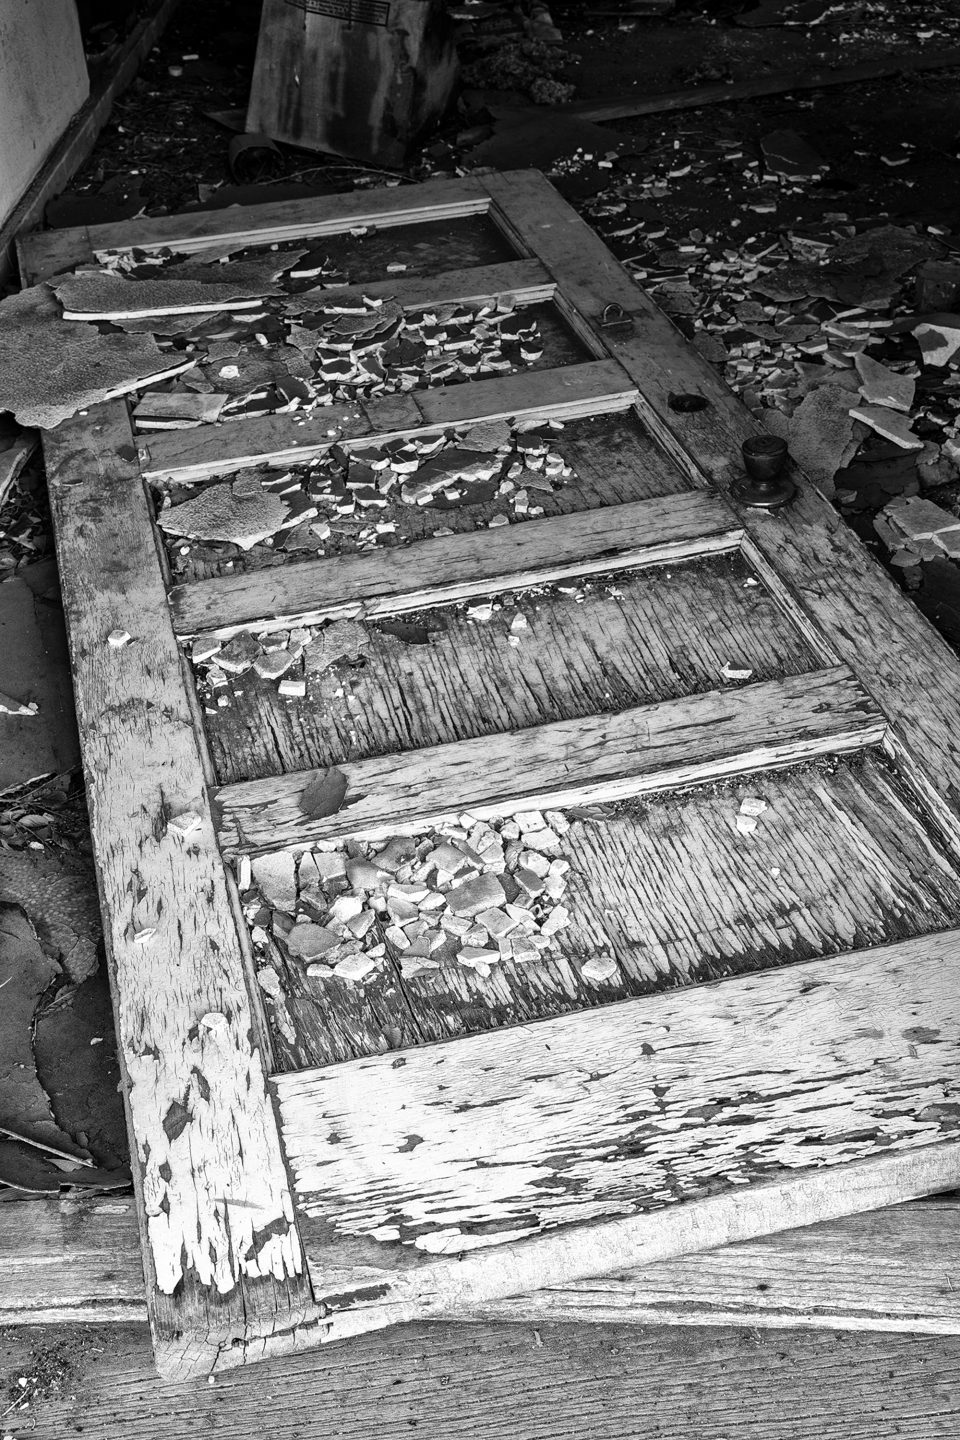 Black and white photograph of a door fallen onto the floor of a motel room in the abandoned Texas Longhorn Motel in the ghost town of Glenrio, on the Texas / New Mexico state line.